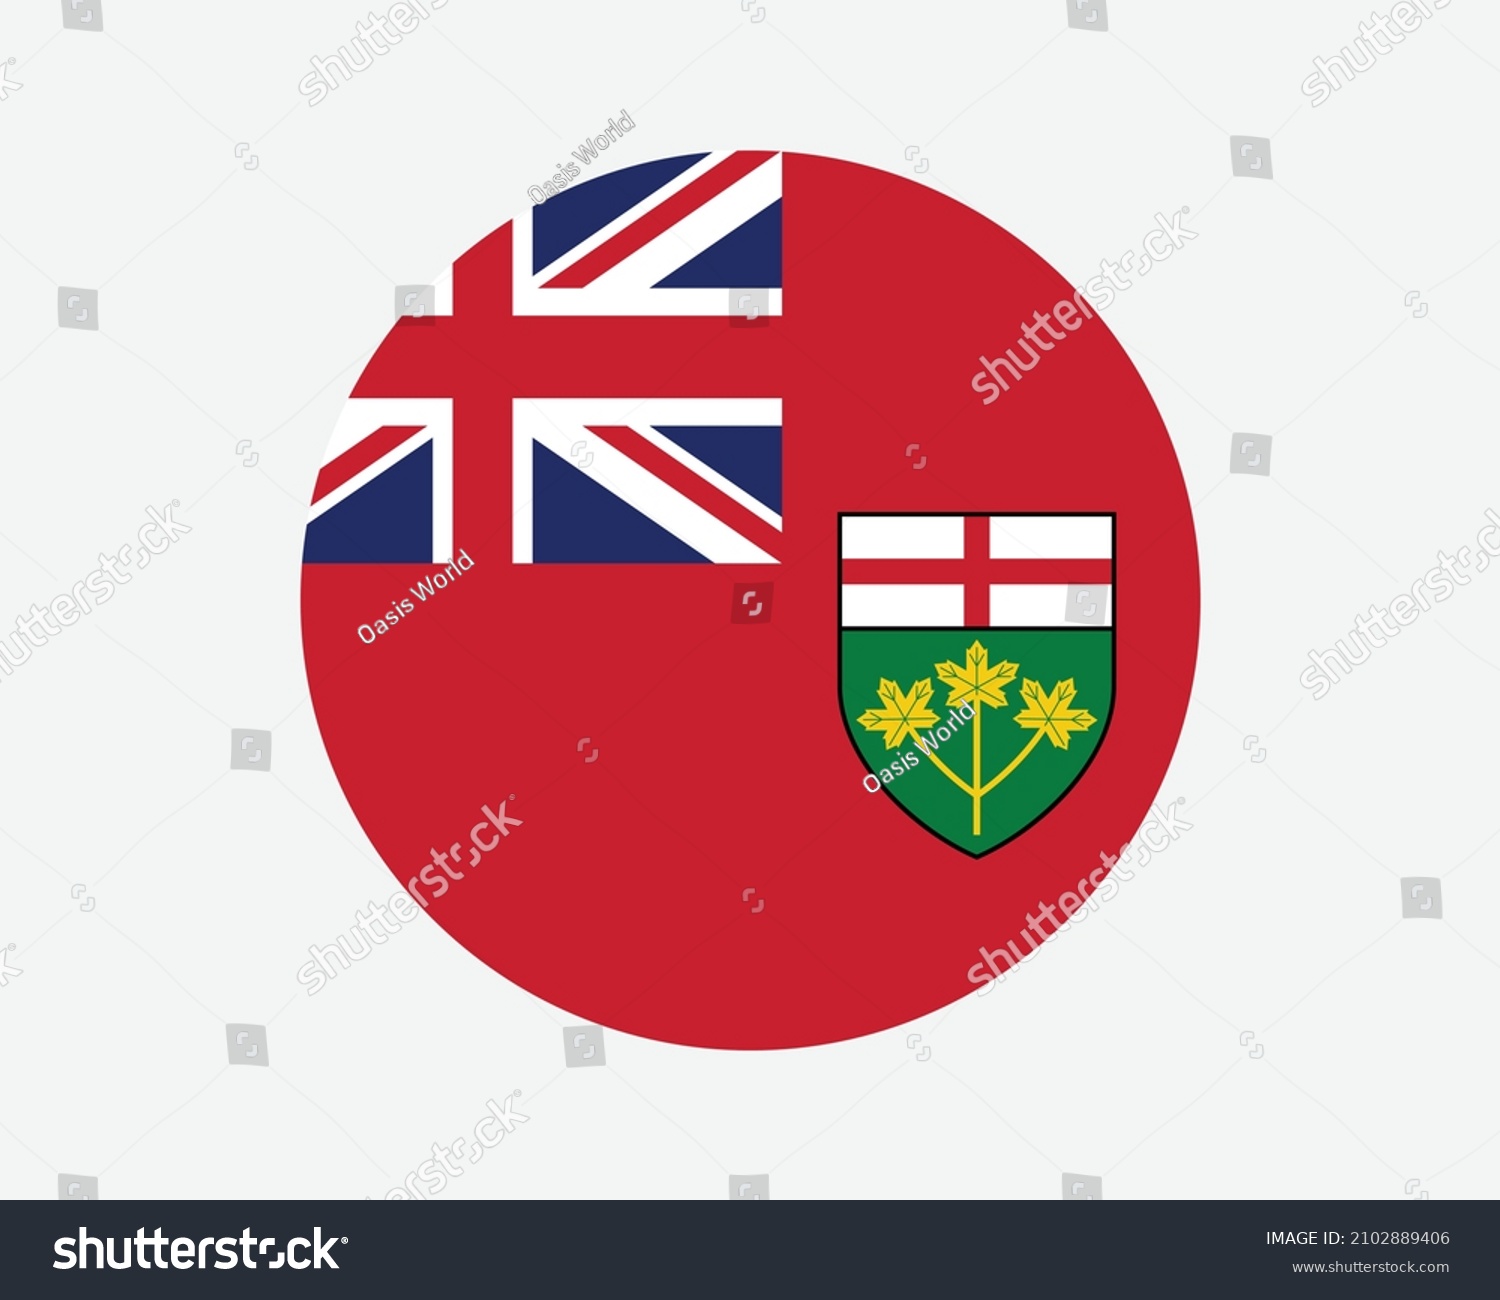 SVG of Ontario Canada Round Flag. ON, Canadian Province Circle Flag. Ontario Canada Circular Shape Button Banner. EPS Vector Illustration. svg